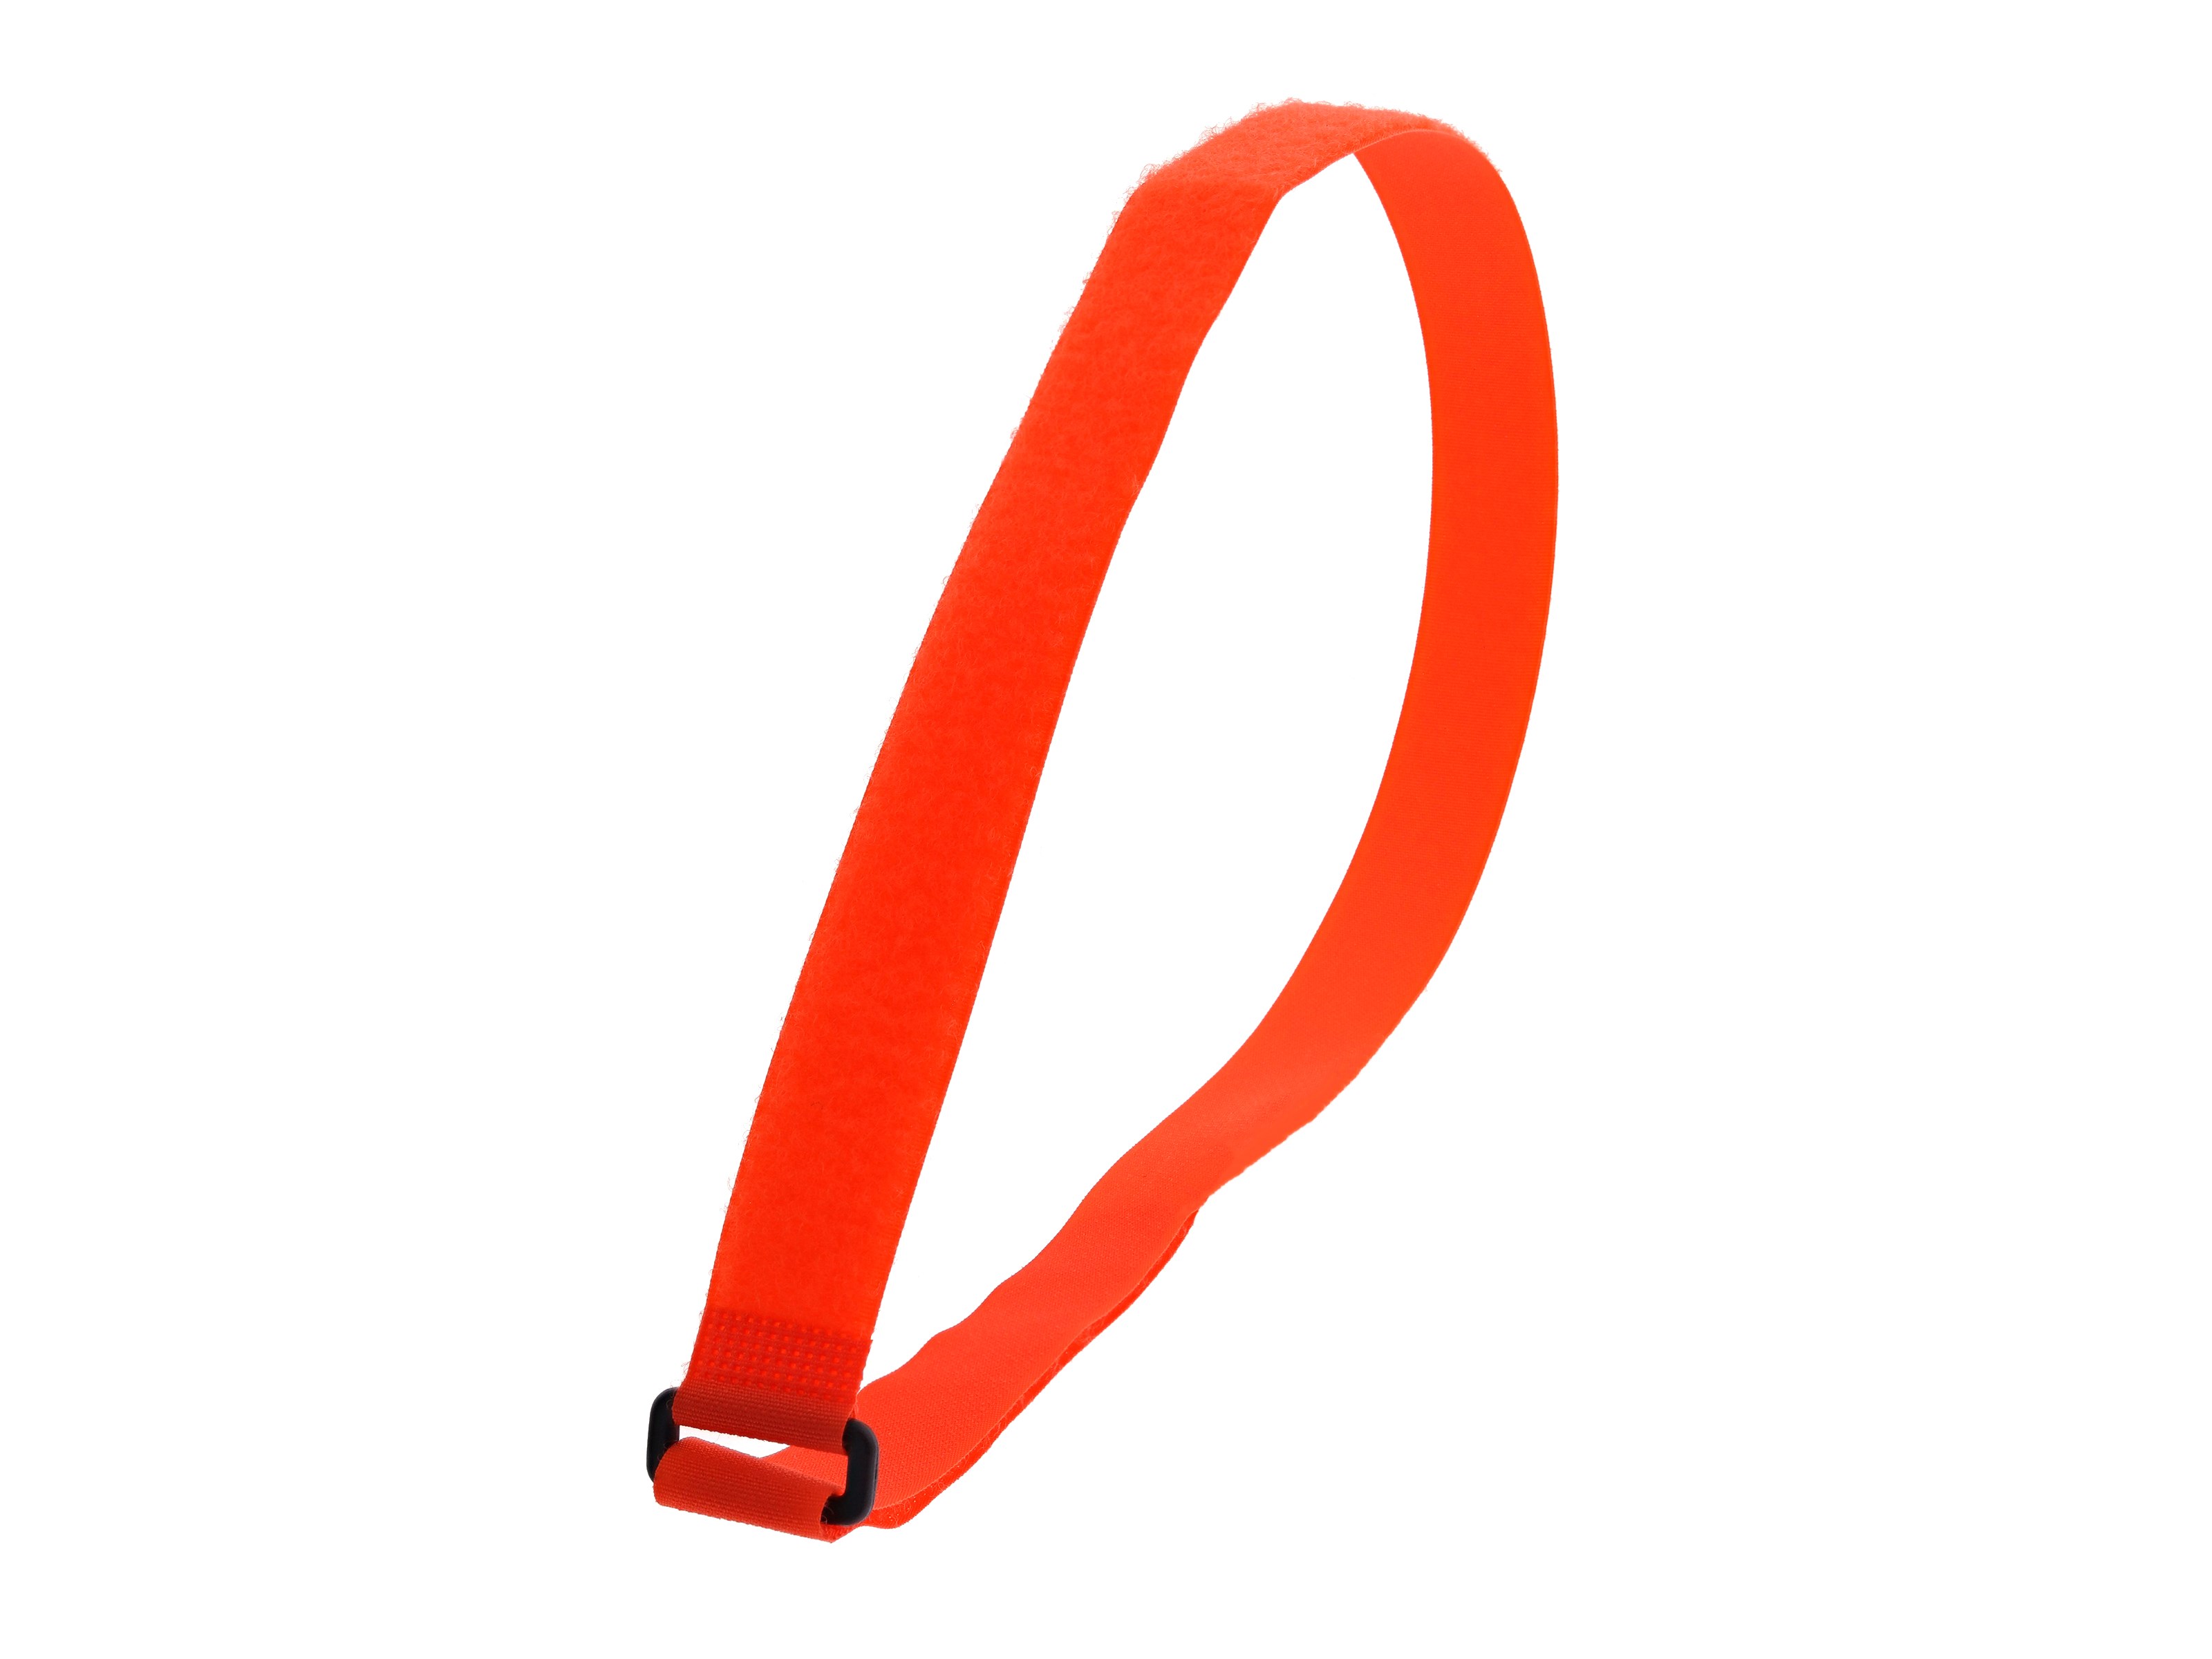 36 x 1 Inch Orange Cinch Straps - 2 Pack - Secure™ Cable Ties